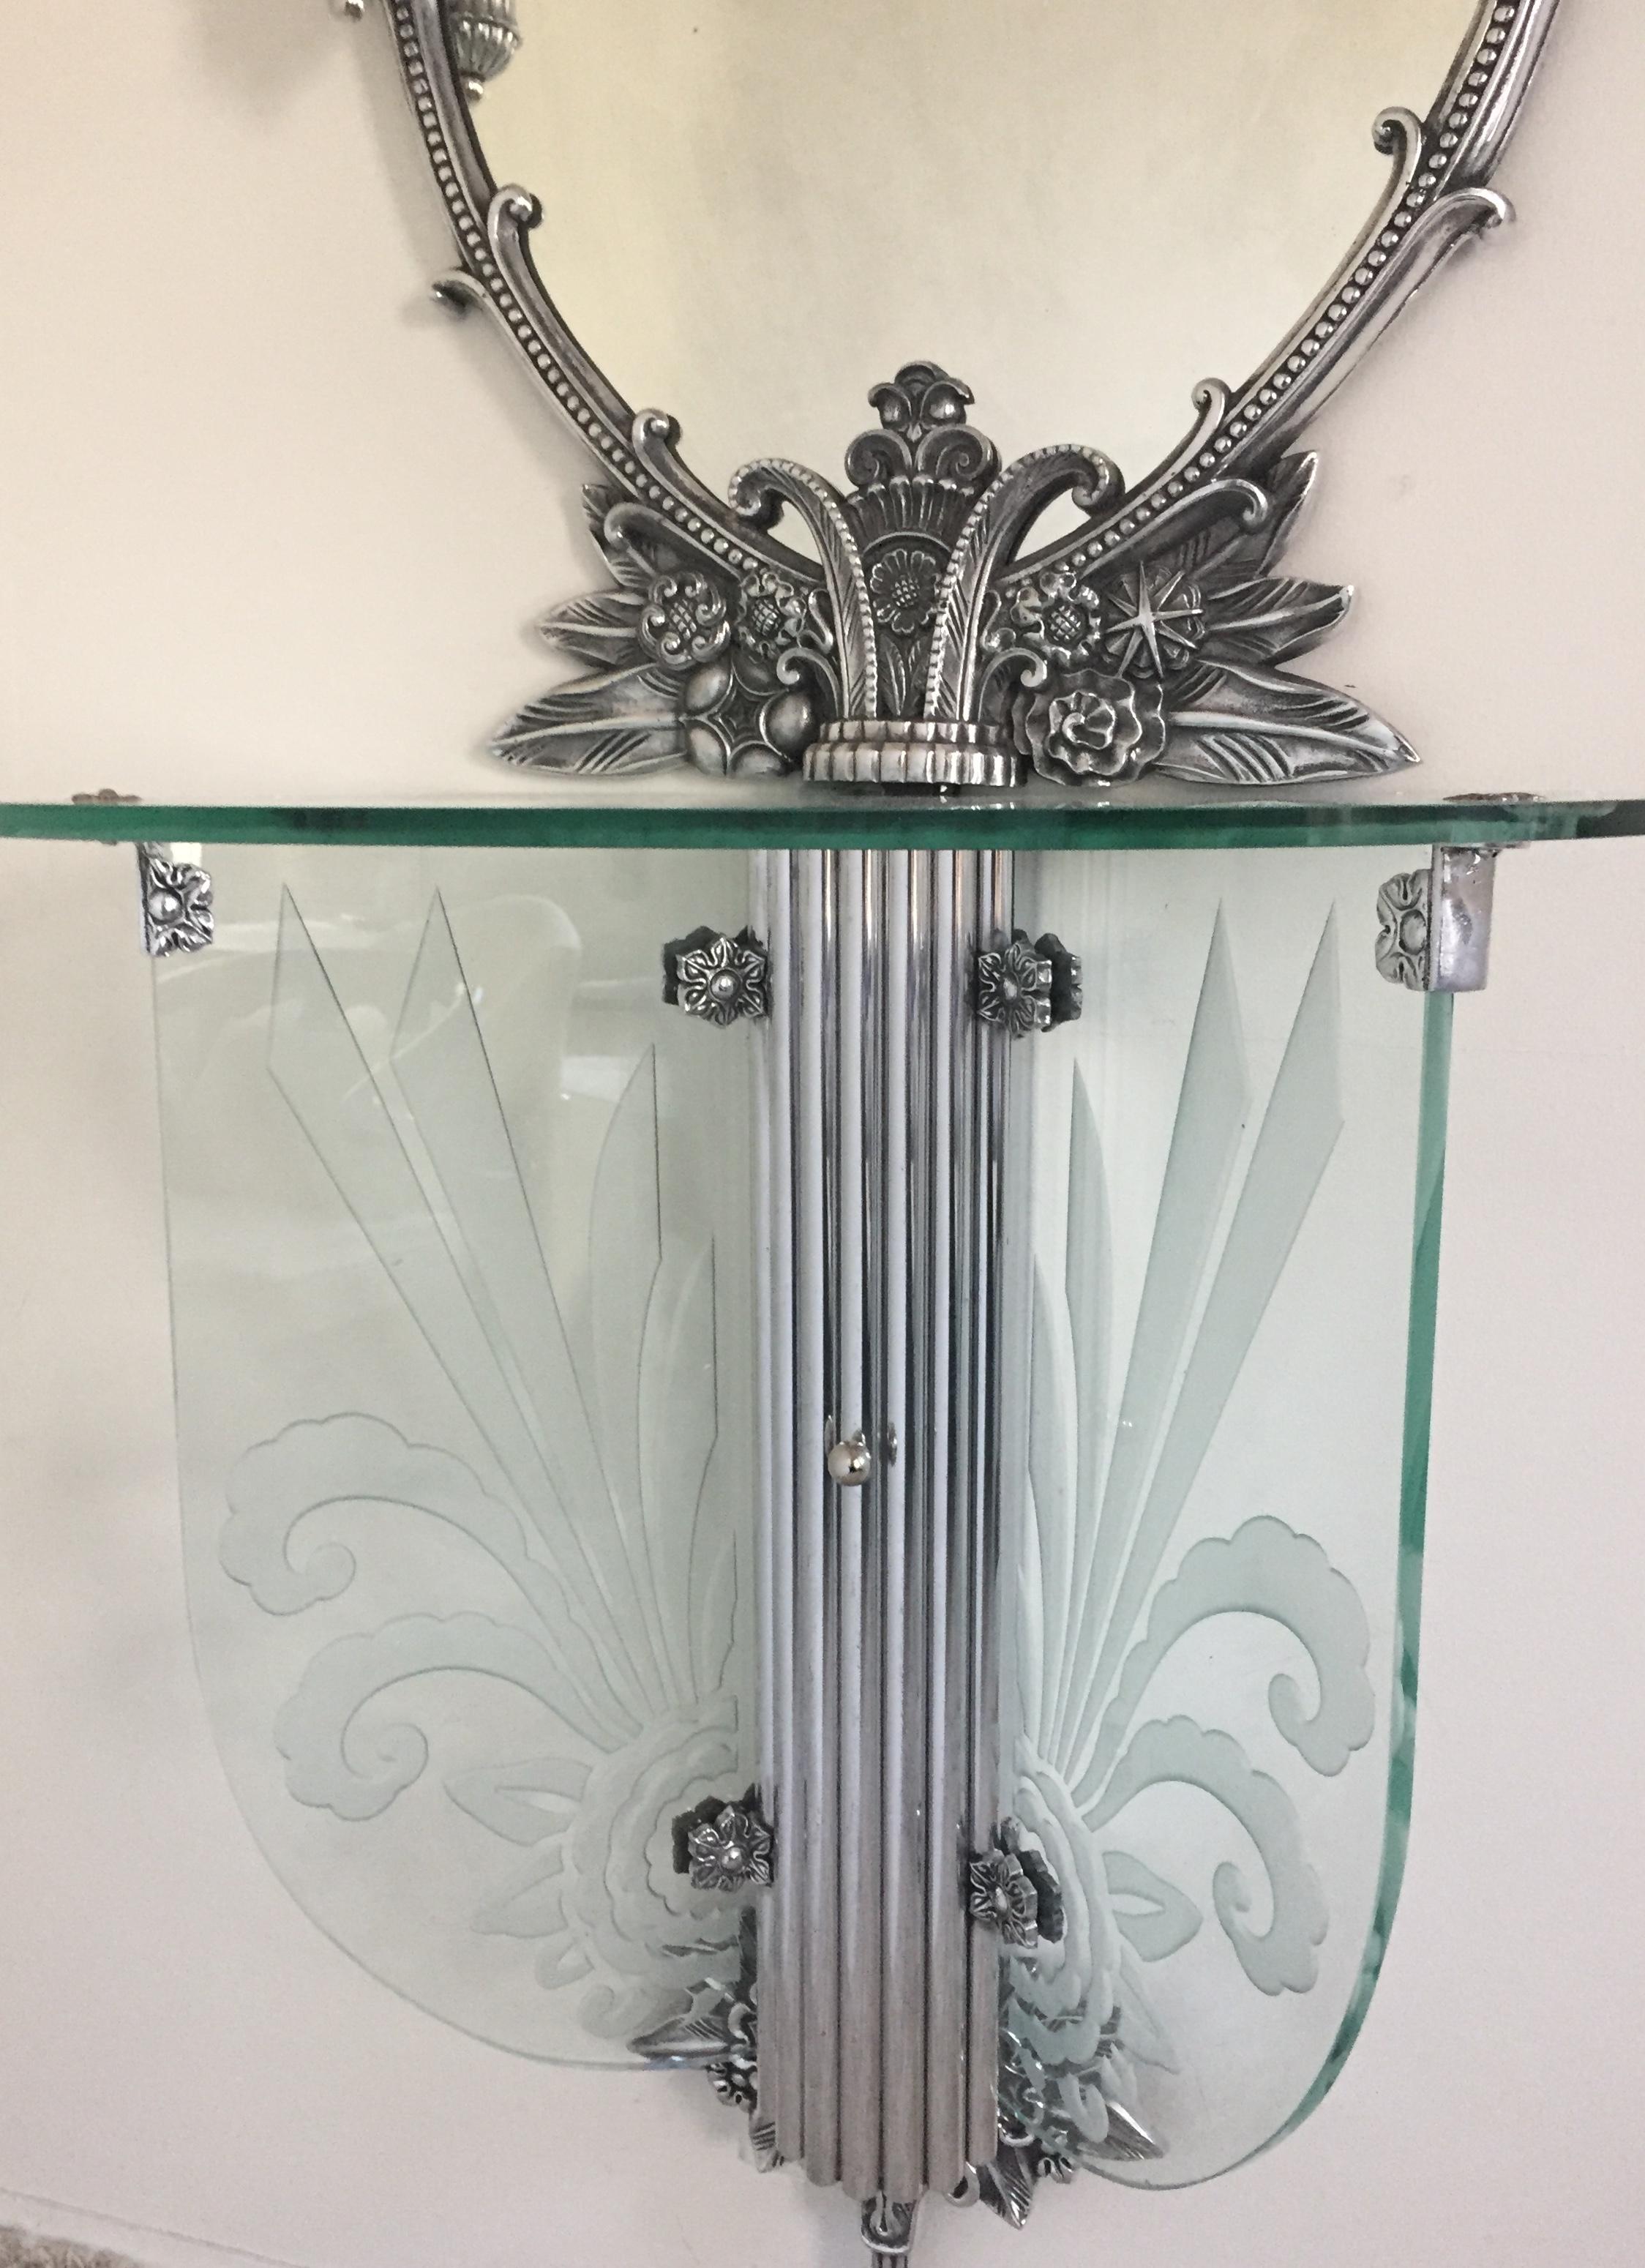 Art Deco Illuminated Vanity Together Mirror with Stool Paramount Theater Boston In Good Condition For Sale In Westport, CT